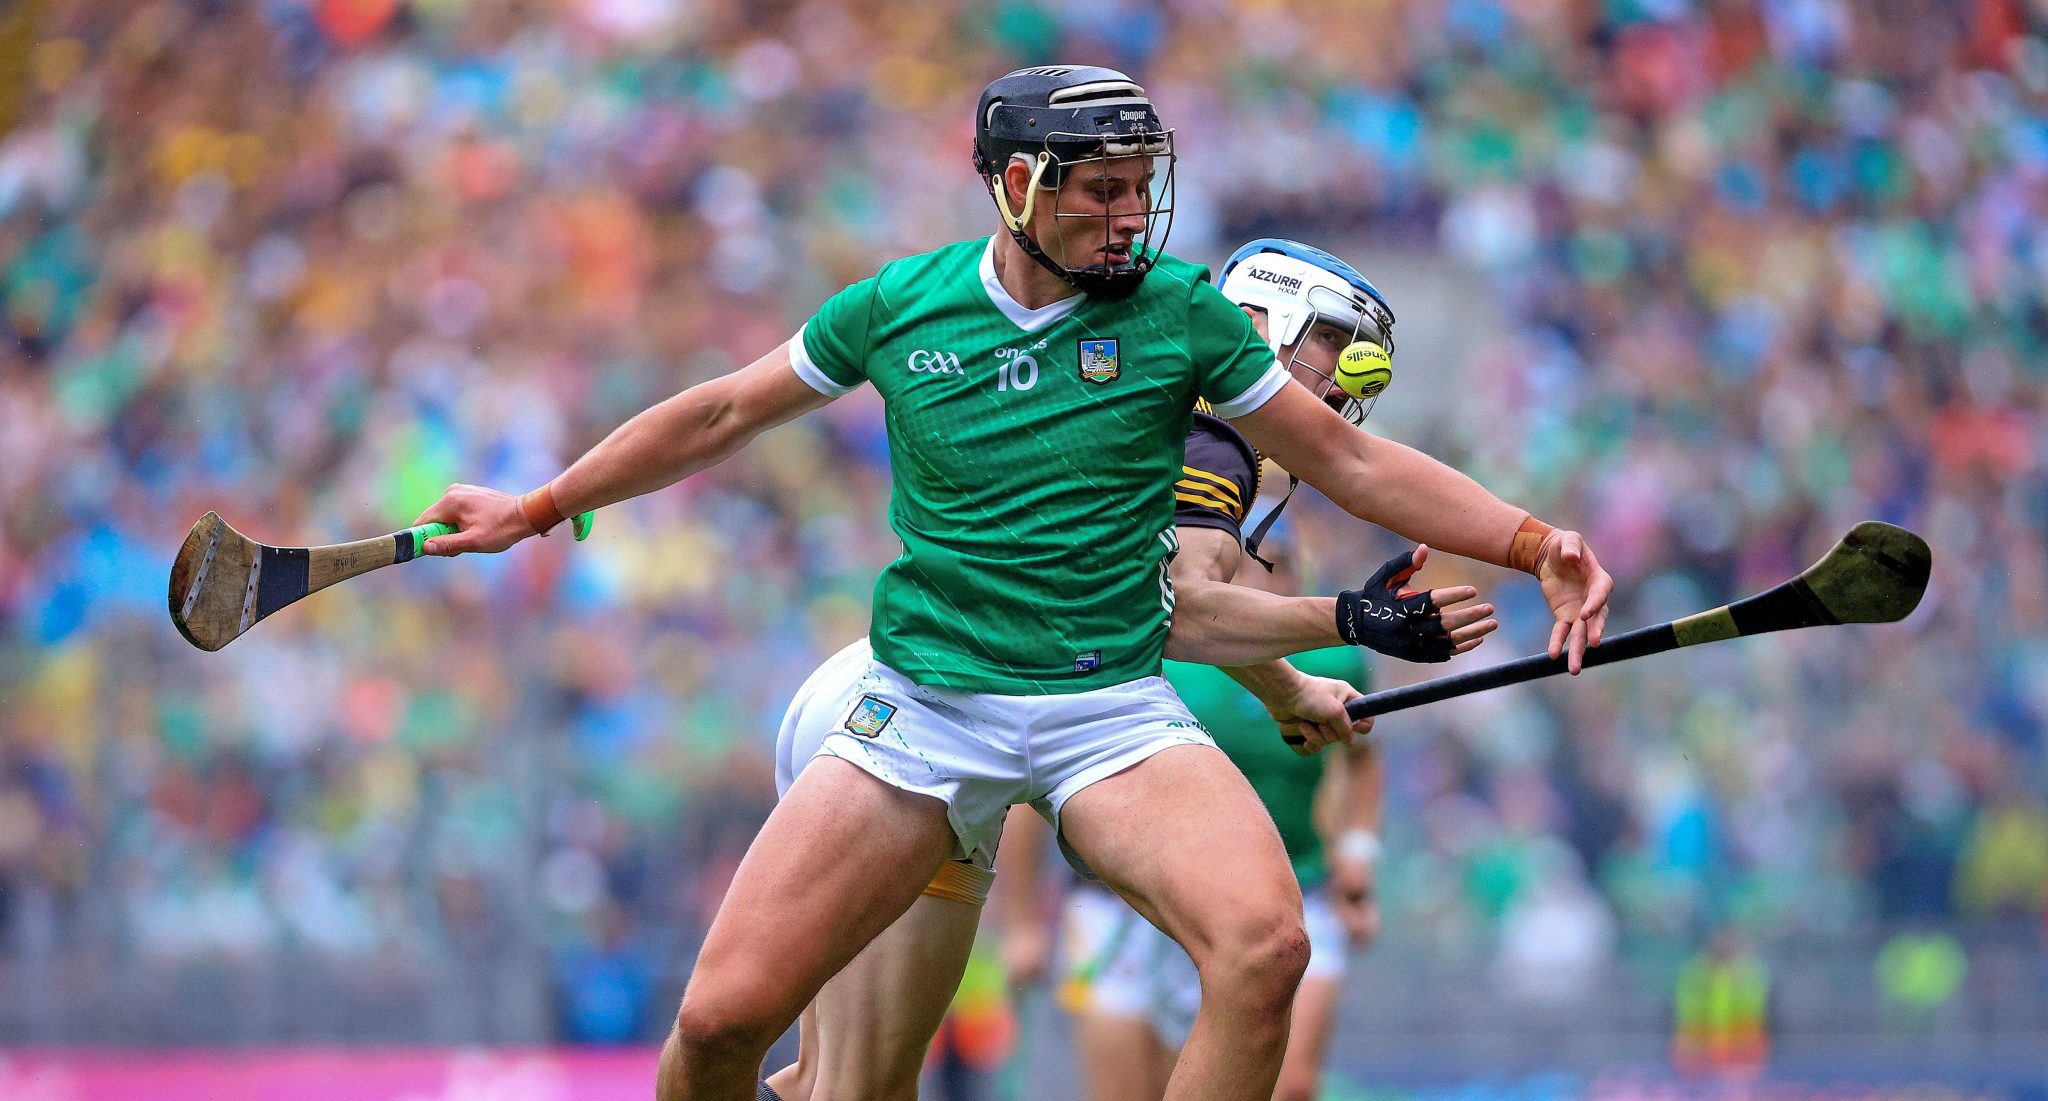 Limerick secure legendary status with masterful second half performance